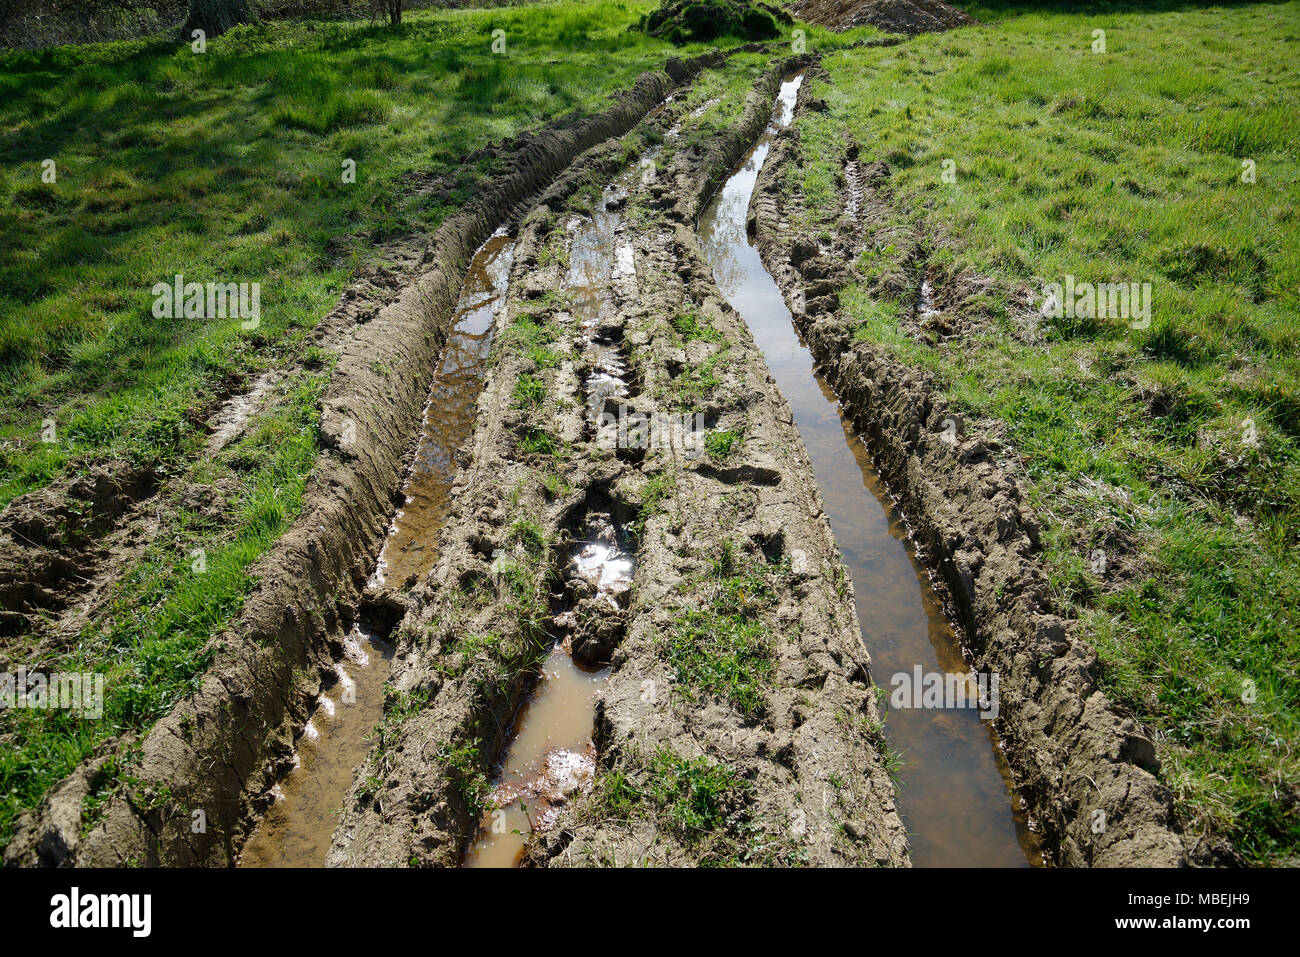 Water filled ruts in a green field caused by a heavy vehicle. Track showing the path of a 4 wheeled vehicle. Stock Photo